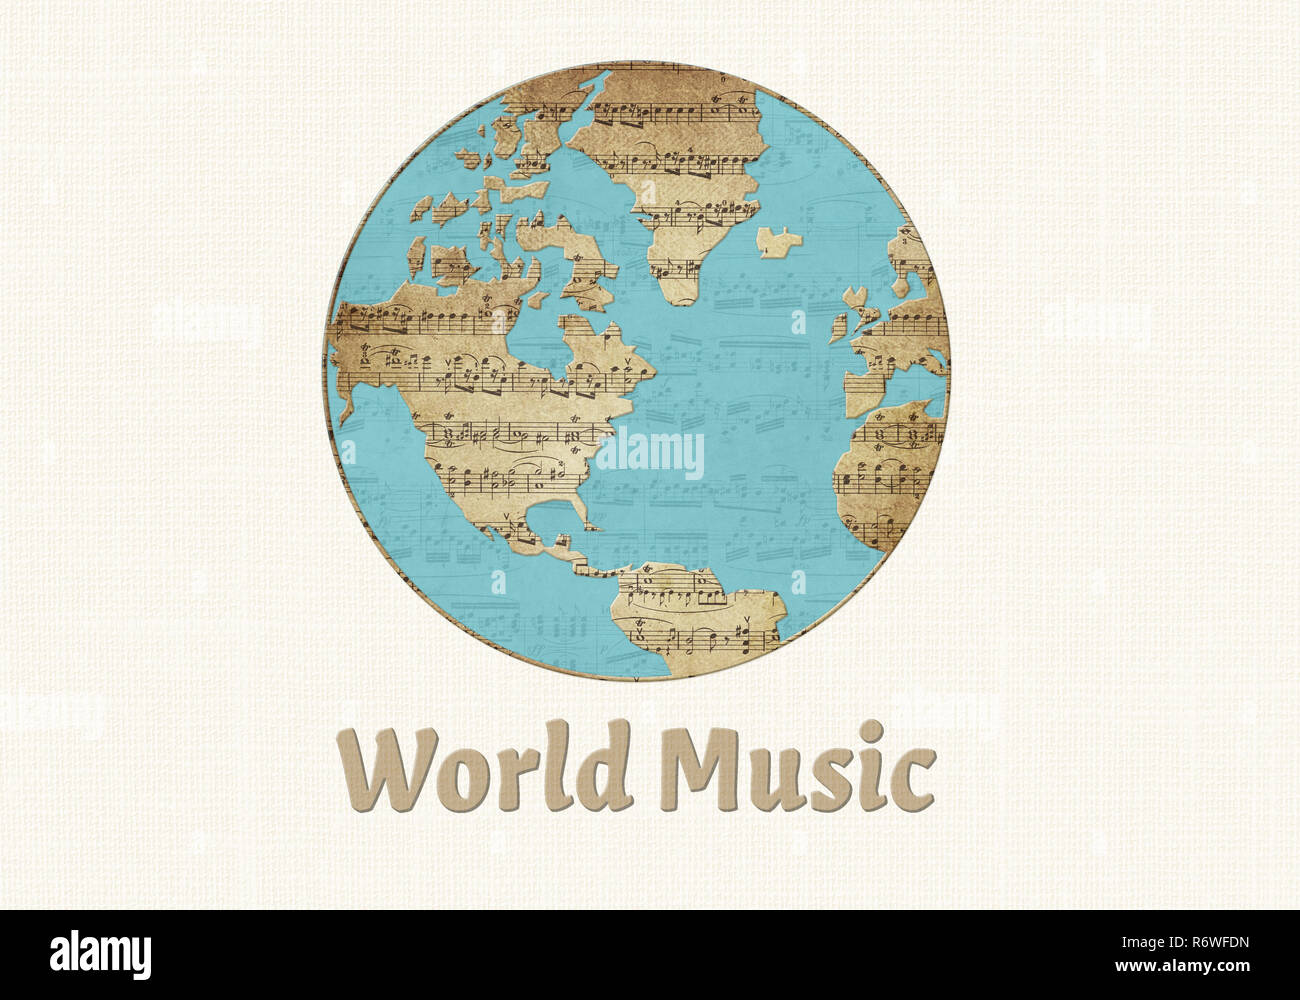 World music illustration world map made of old sheet music with world music day text Stock Photo